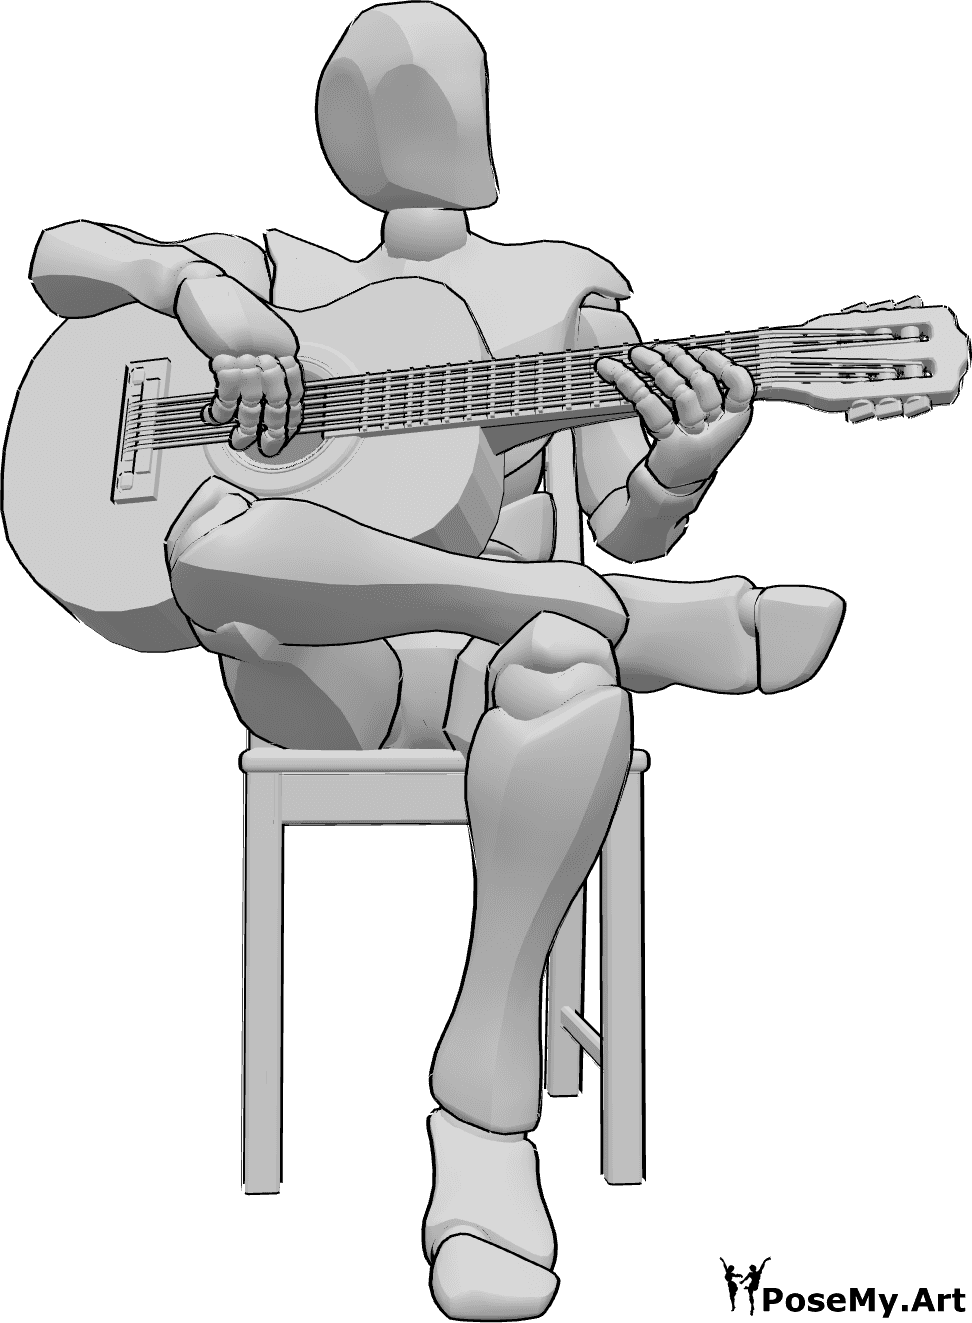 Pose Reference- Male playing guitar pose - Male is sitting on a chair with his legs crossed and playing guitar, looking to the left